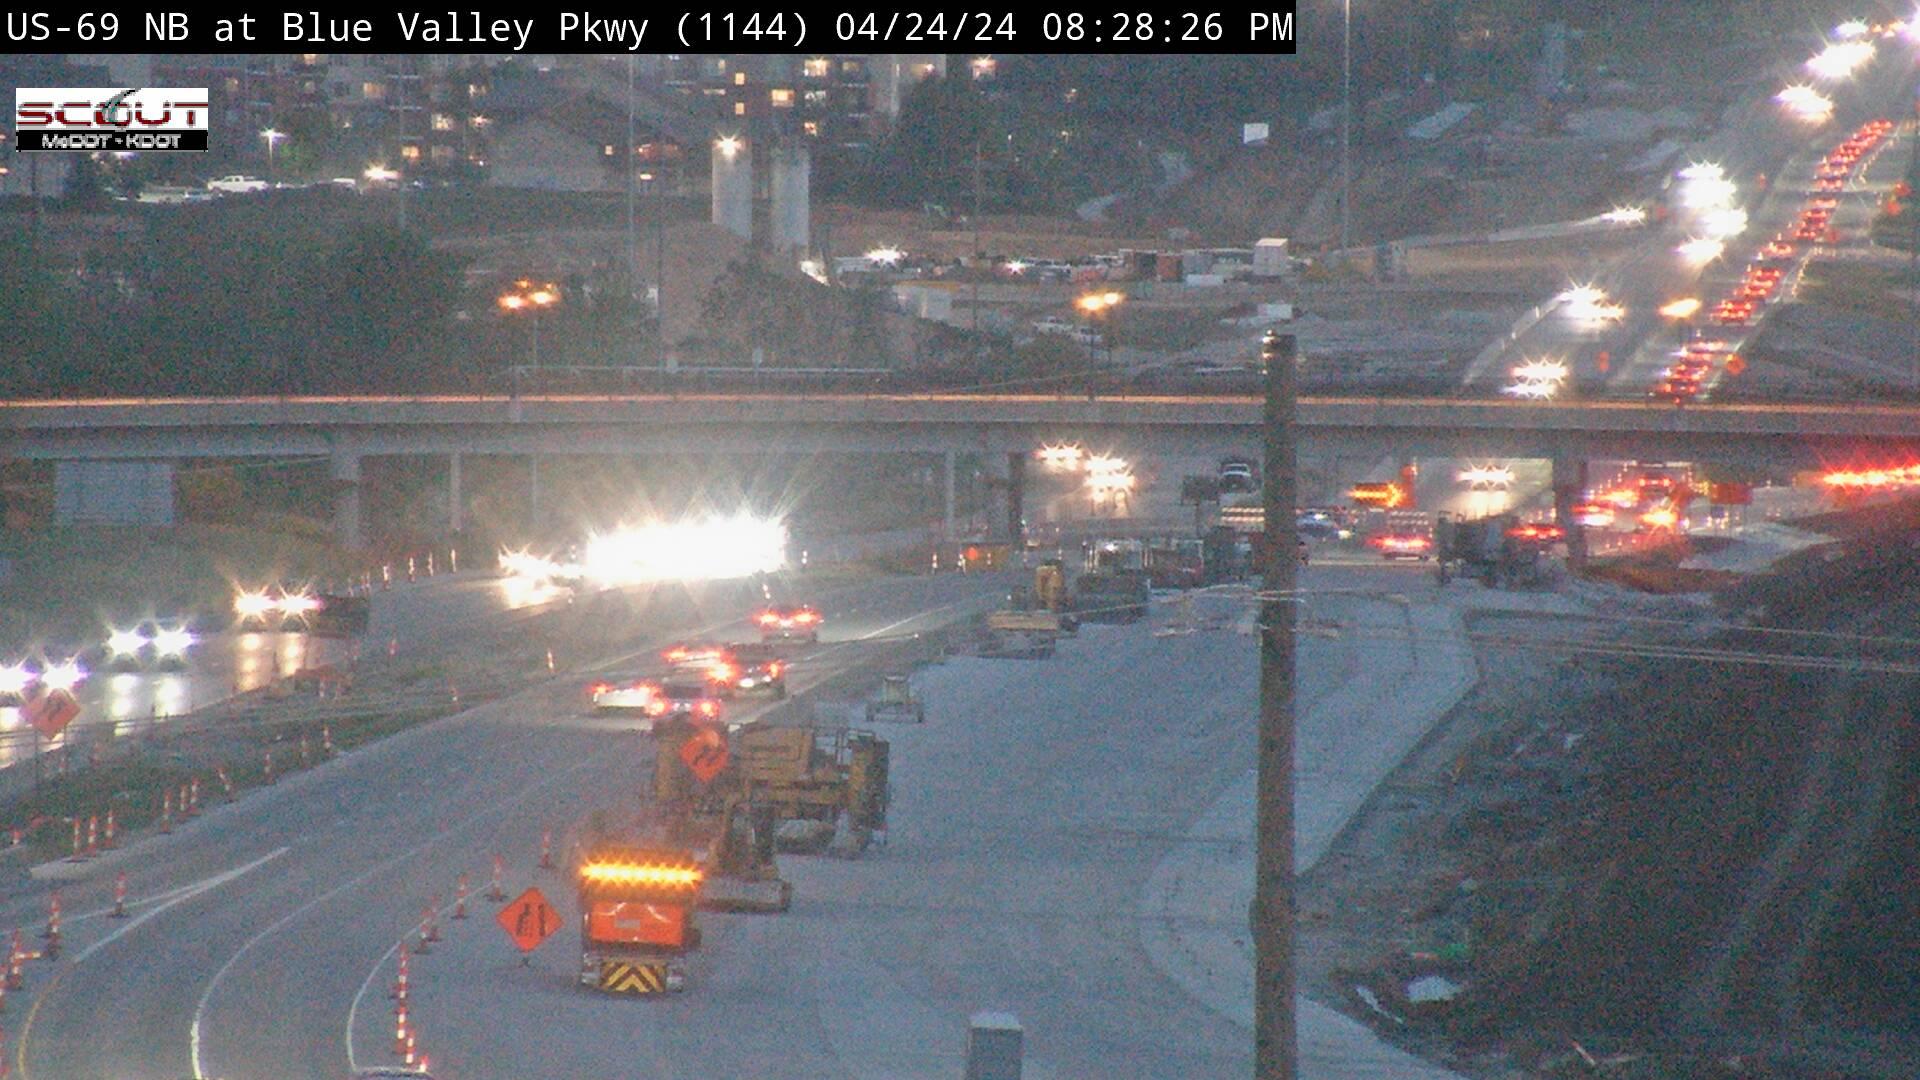 Overland Park: US- N @ Blue Valley Parkway Traffic Camera